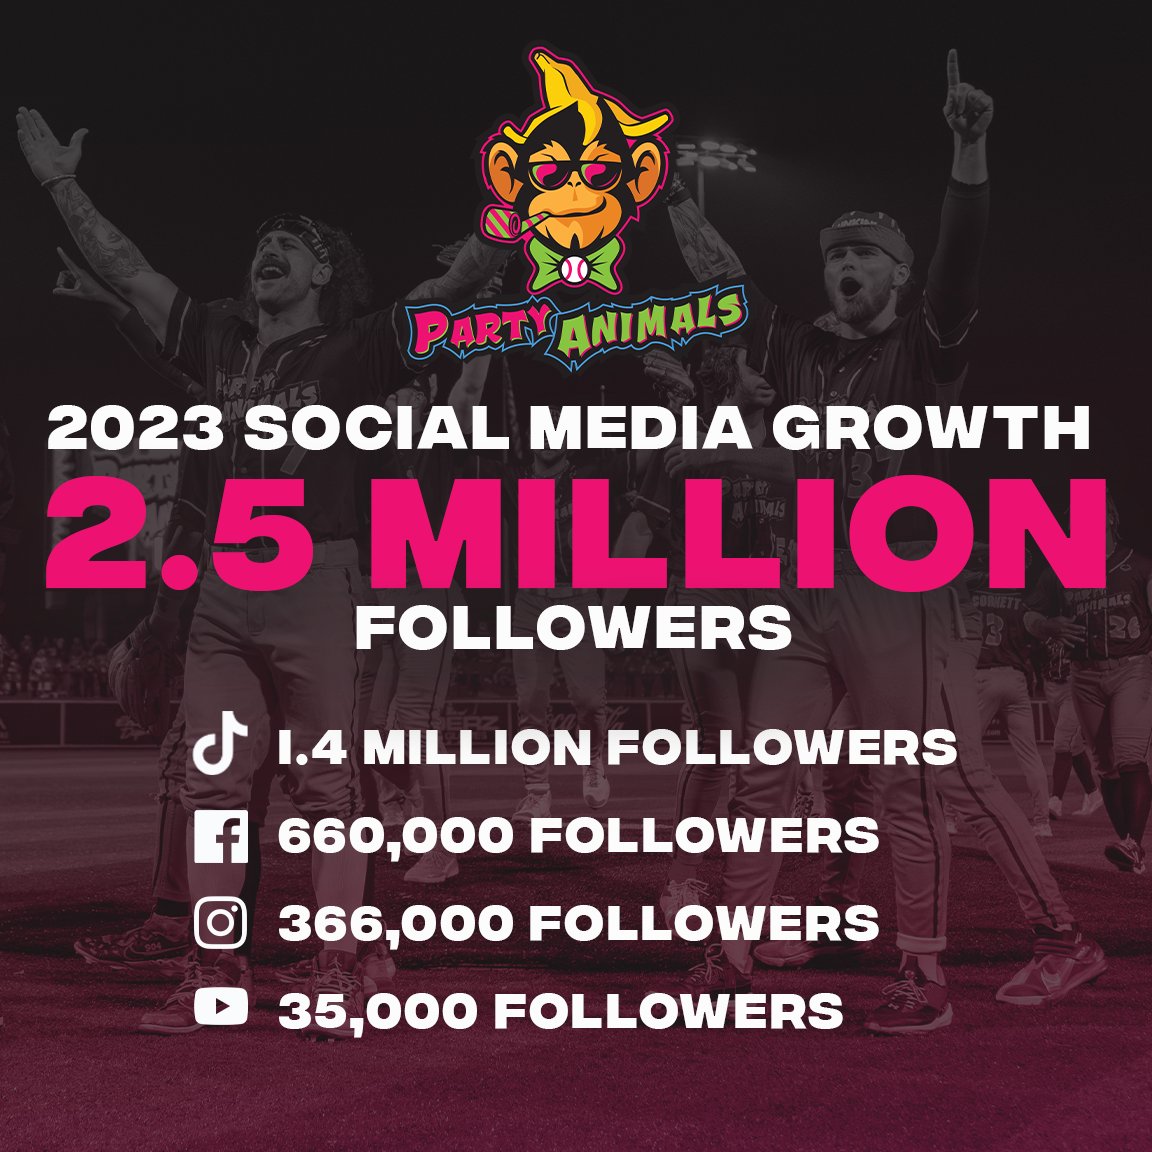 Epic year and amazing growth for @ThePrtyAnimals Thanks to all the new fans for following this crazy group of guys that know how to throw the 'Greatest Party in Sports.' Party On!